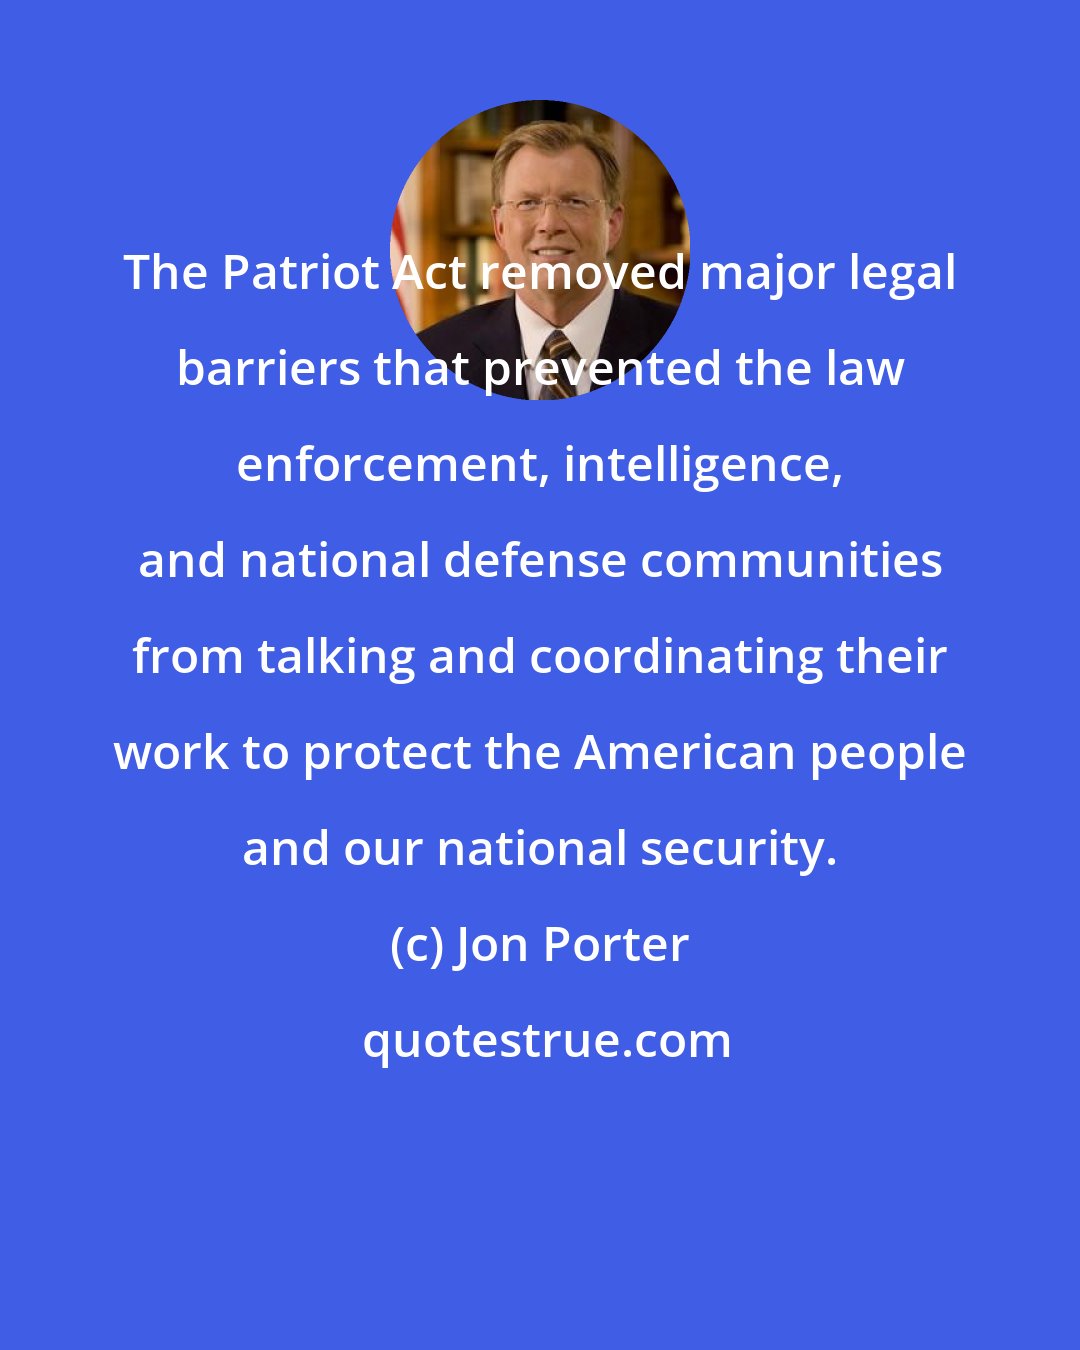 Jon Porter: The Patriot Act removed major legal barriers that prevented the law enforcement, intelligence, and national defense communities from talking and coordinating their work to protect the American people and our national security.